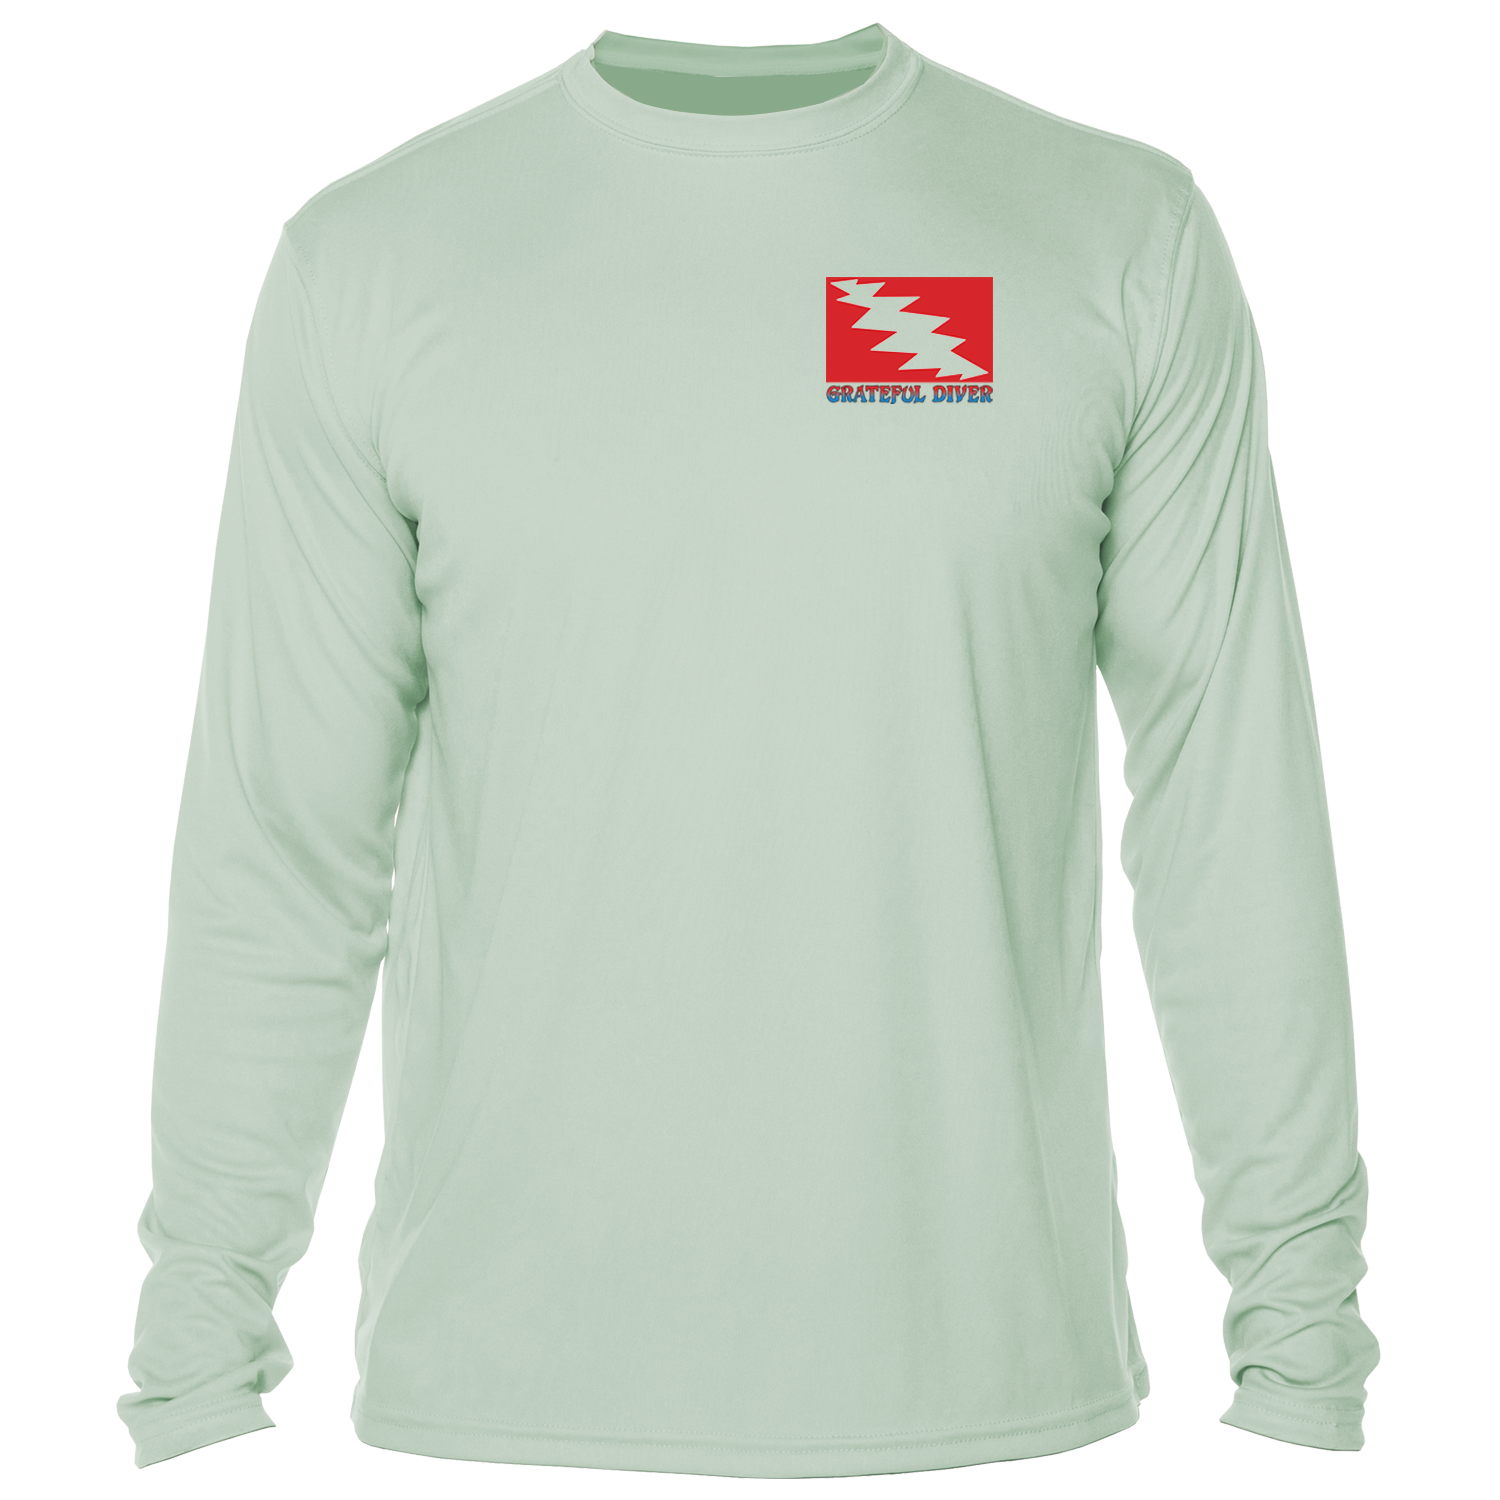 Grateful Diver Ship of Fools UV Shirt in seagrass showing the front diver flag logo